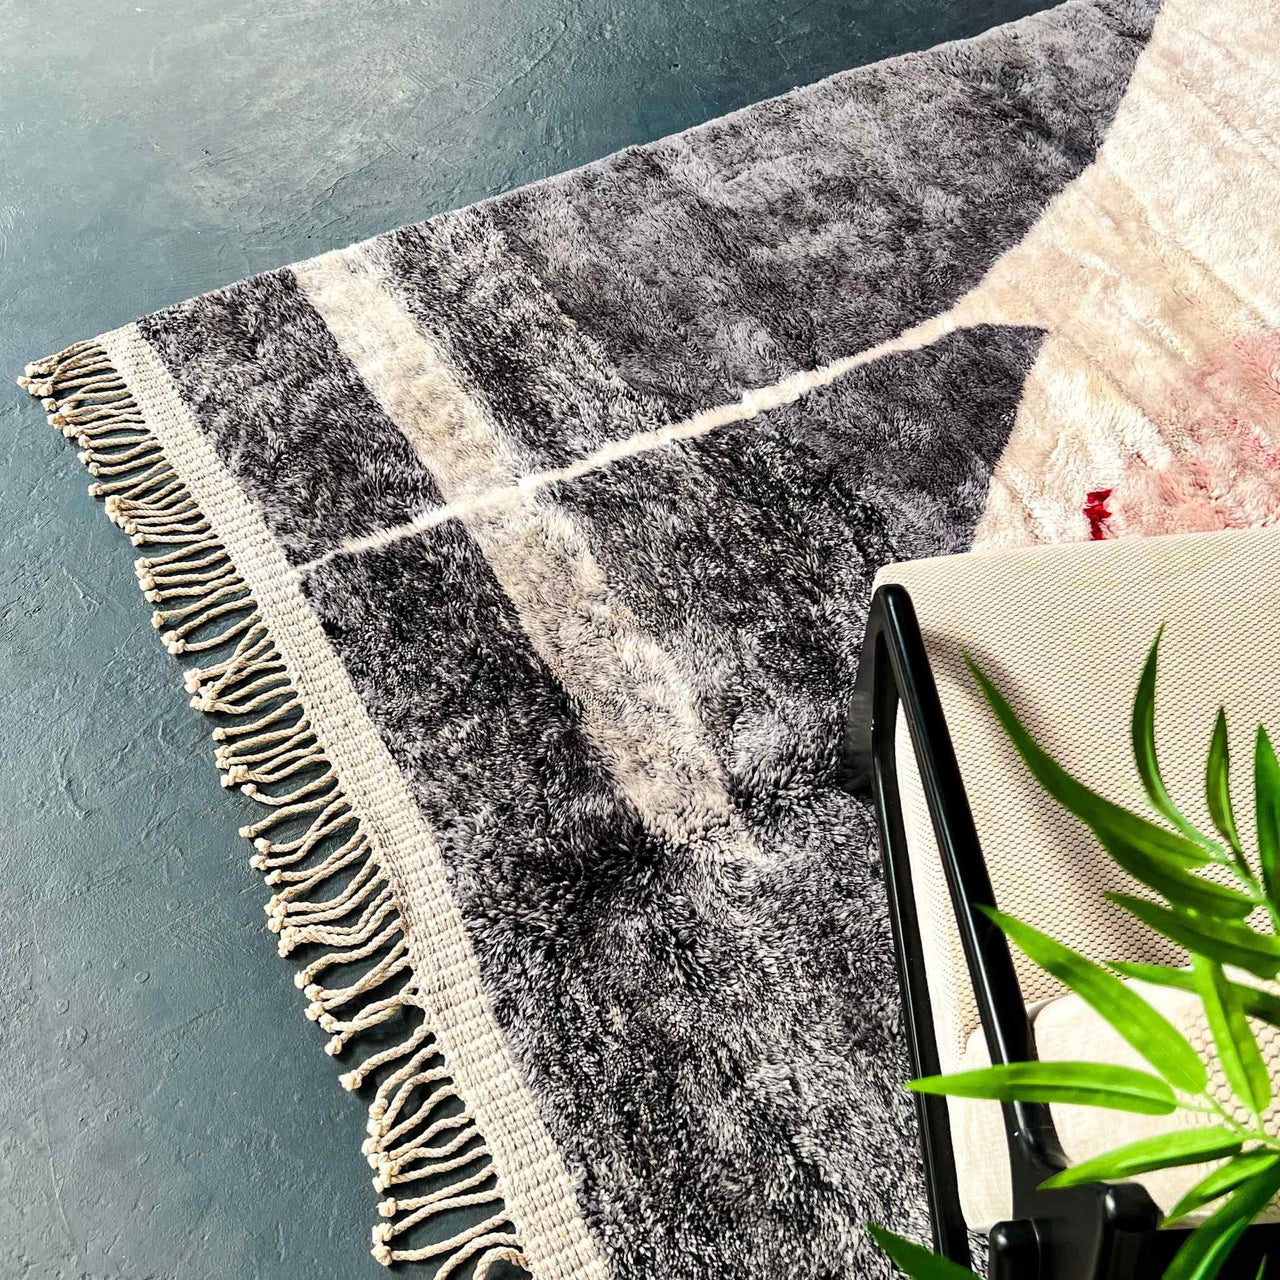 Create a cozy and inviting space with the Rosy Abstract Handwoven 100% Wool Beni Mrirt Rug, a beautiful Beni Ourain rug measuring 8.1 X 9.9 ft / 247 X 304 cm. This handwoven rug is made using traditional techniques and features a soft, plush texture.